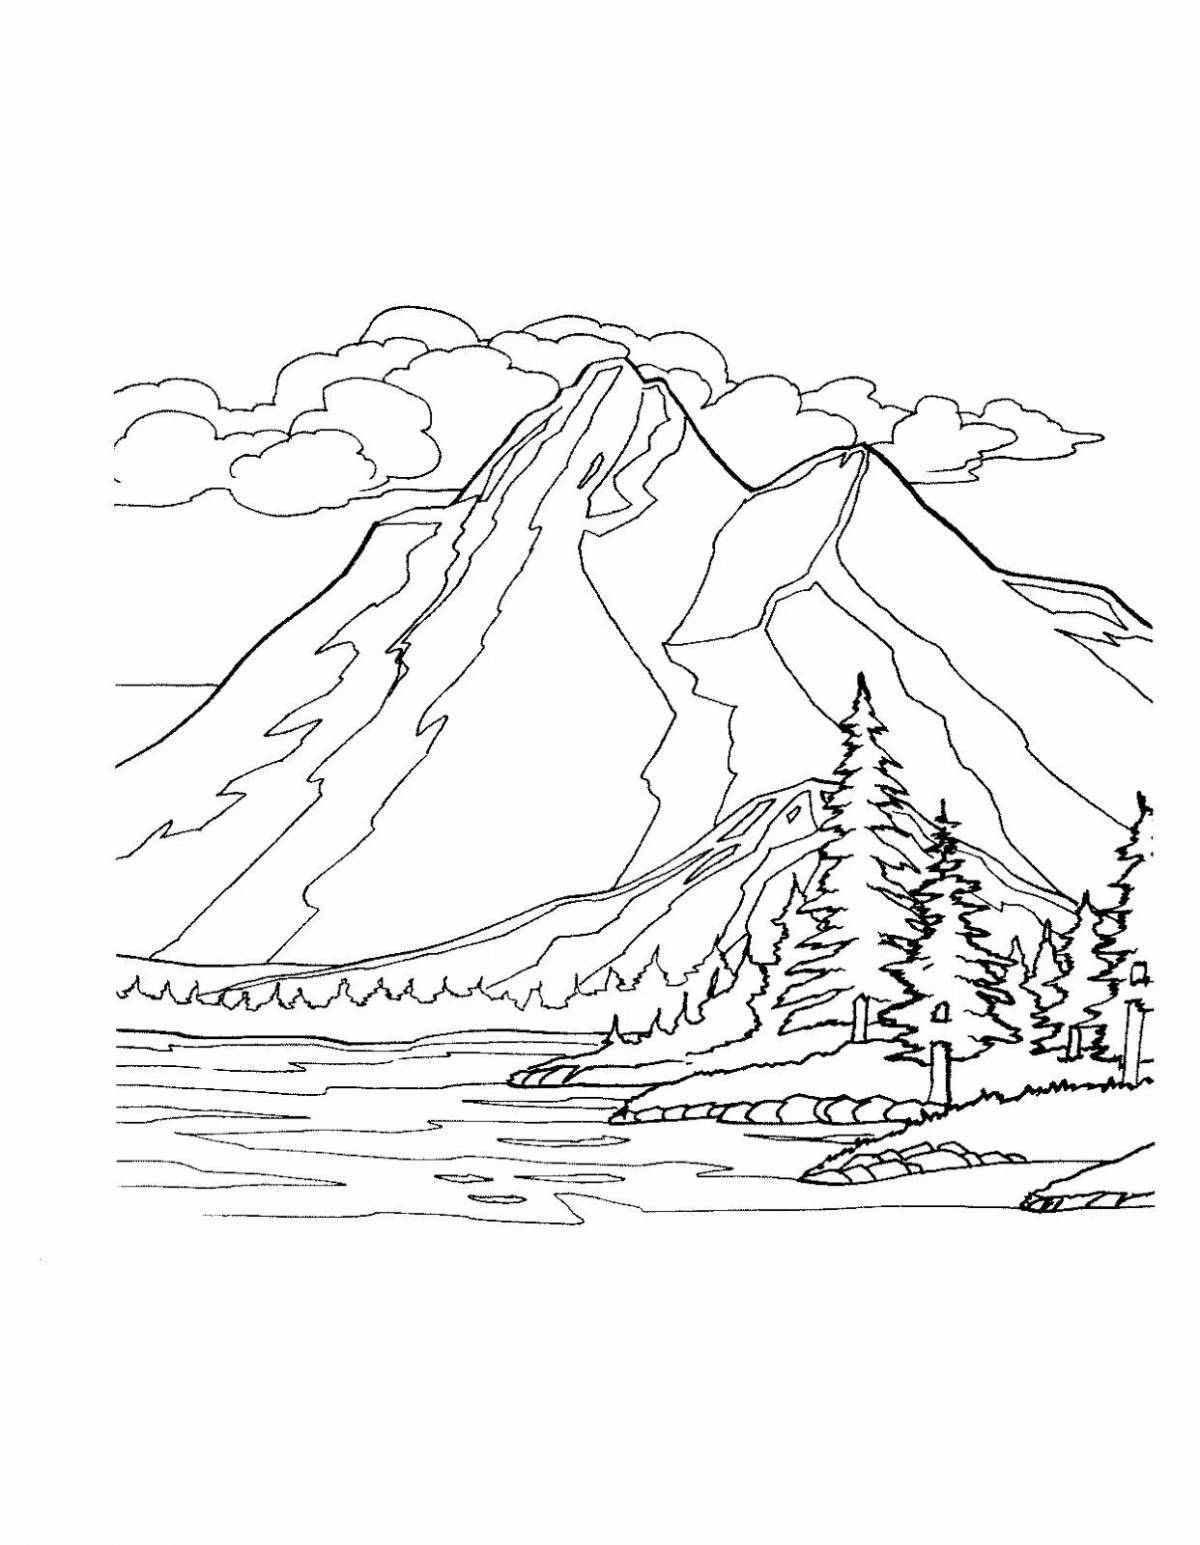 Coloring book inviting mountain scenery for children